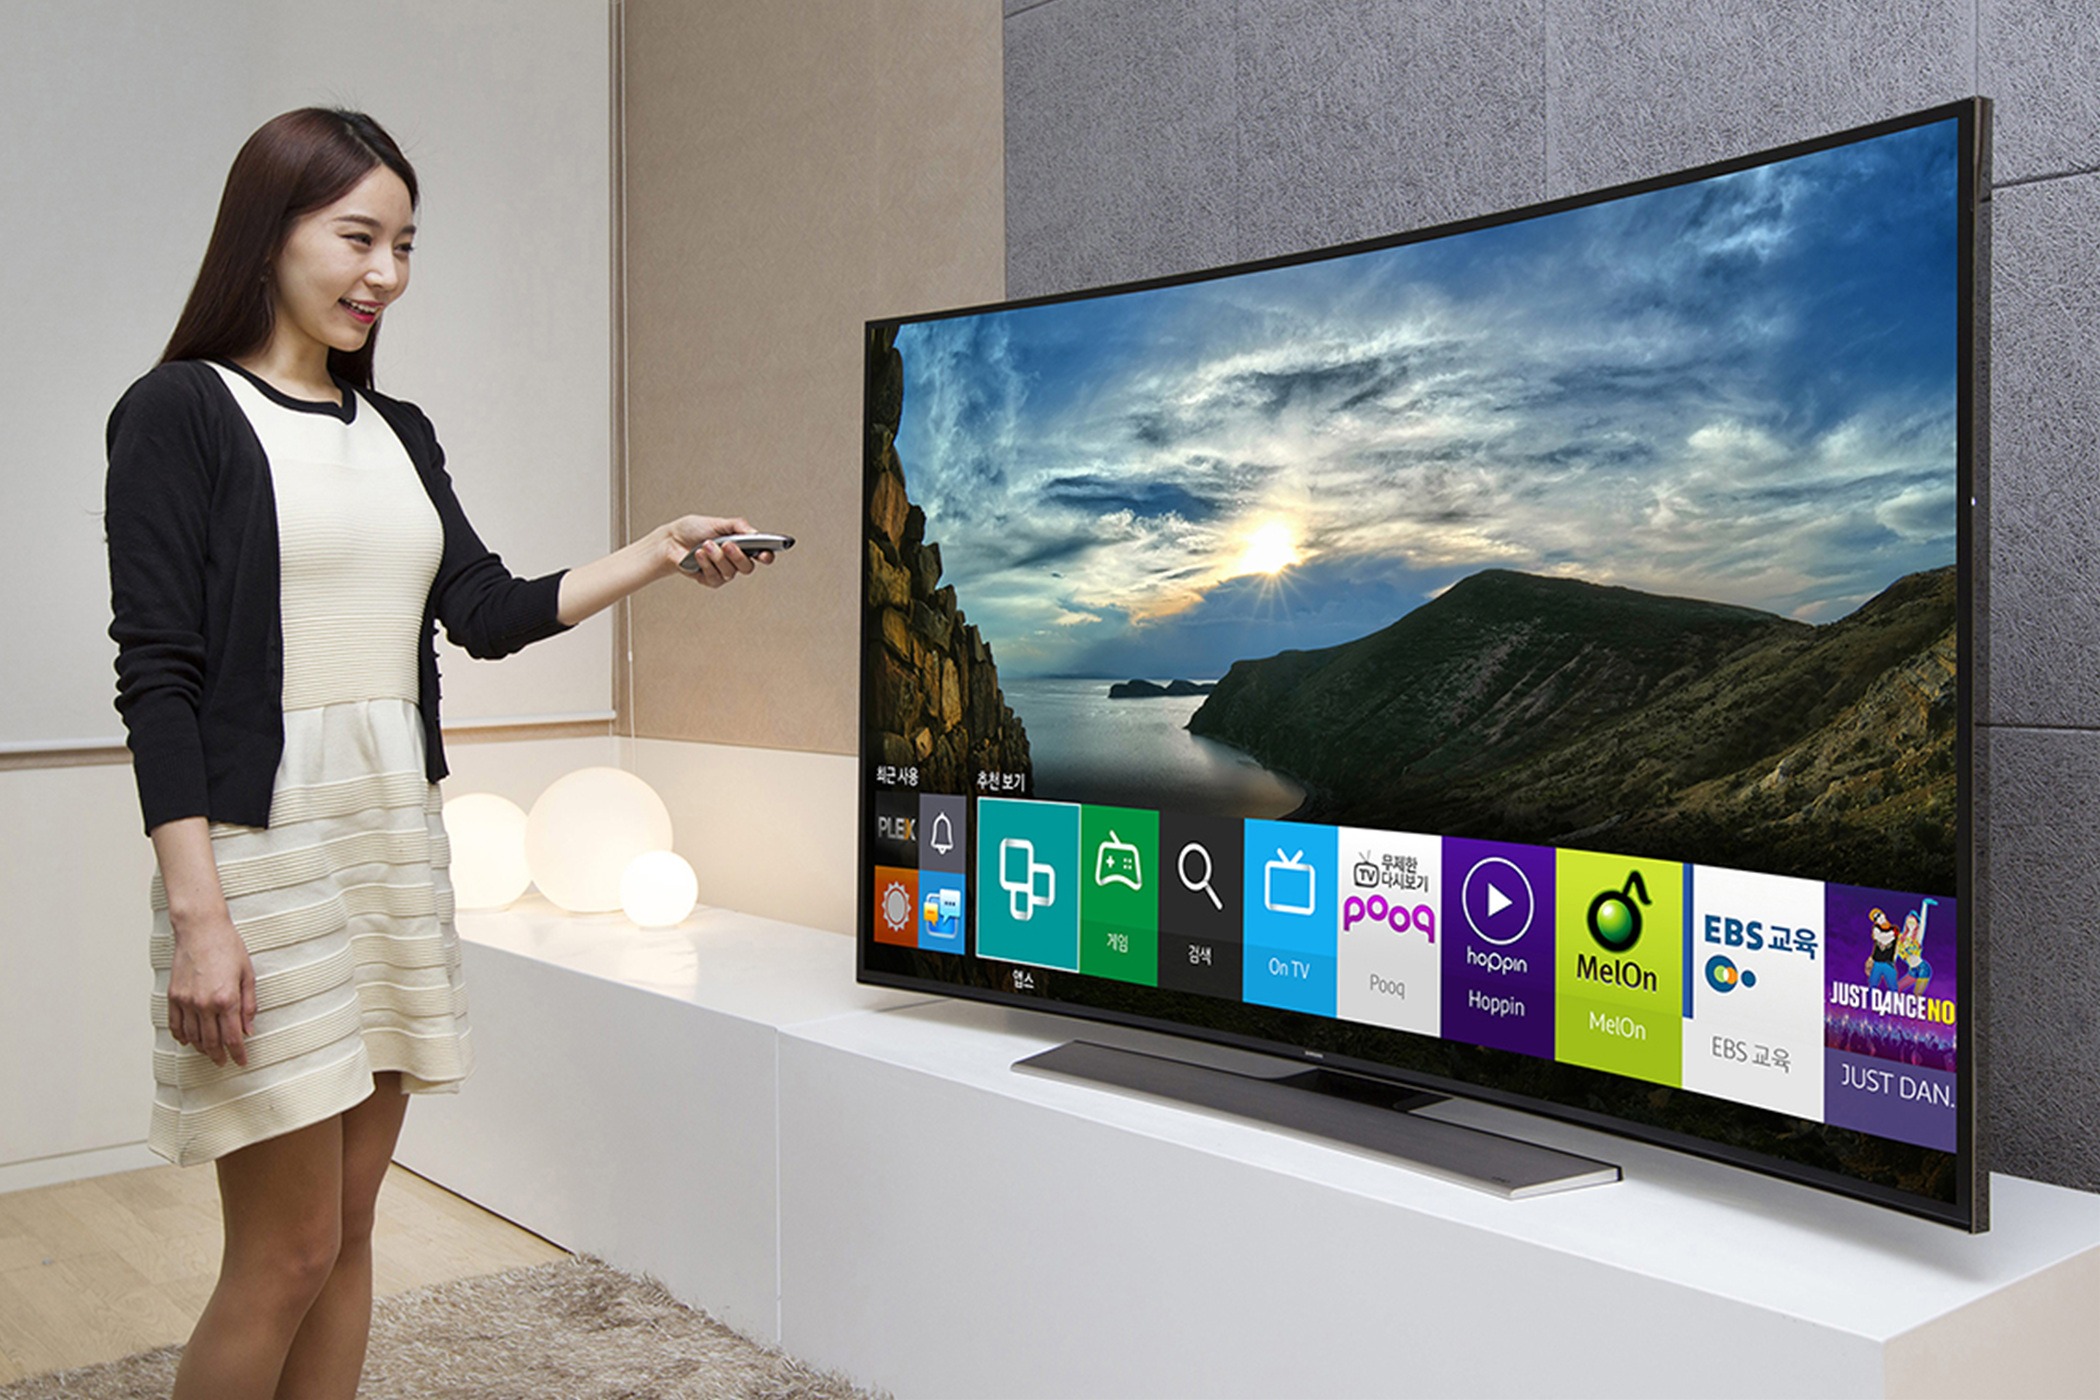 How To Access And Use Samsung Apps On Samsung Smart TVs